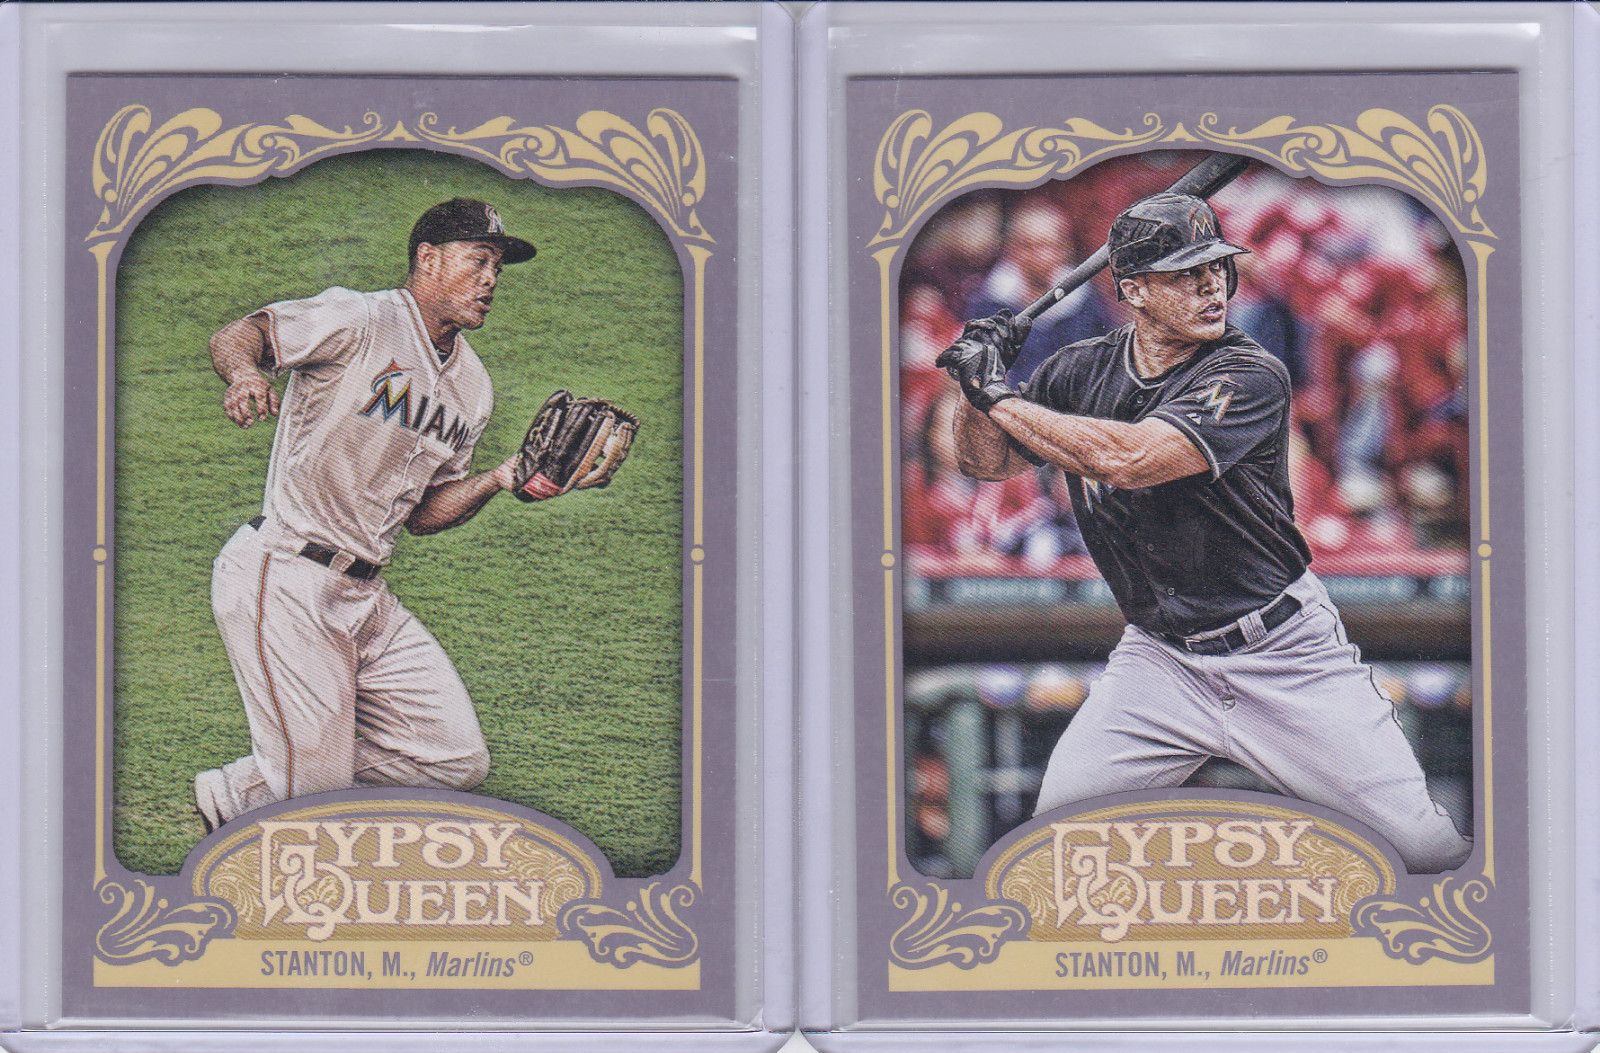 2012 Topps Gypsy Queen Mike Stanton Sp Photo Variation